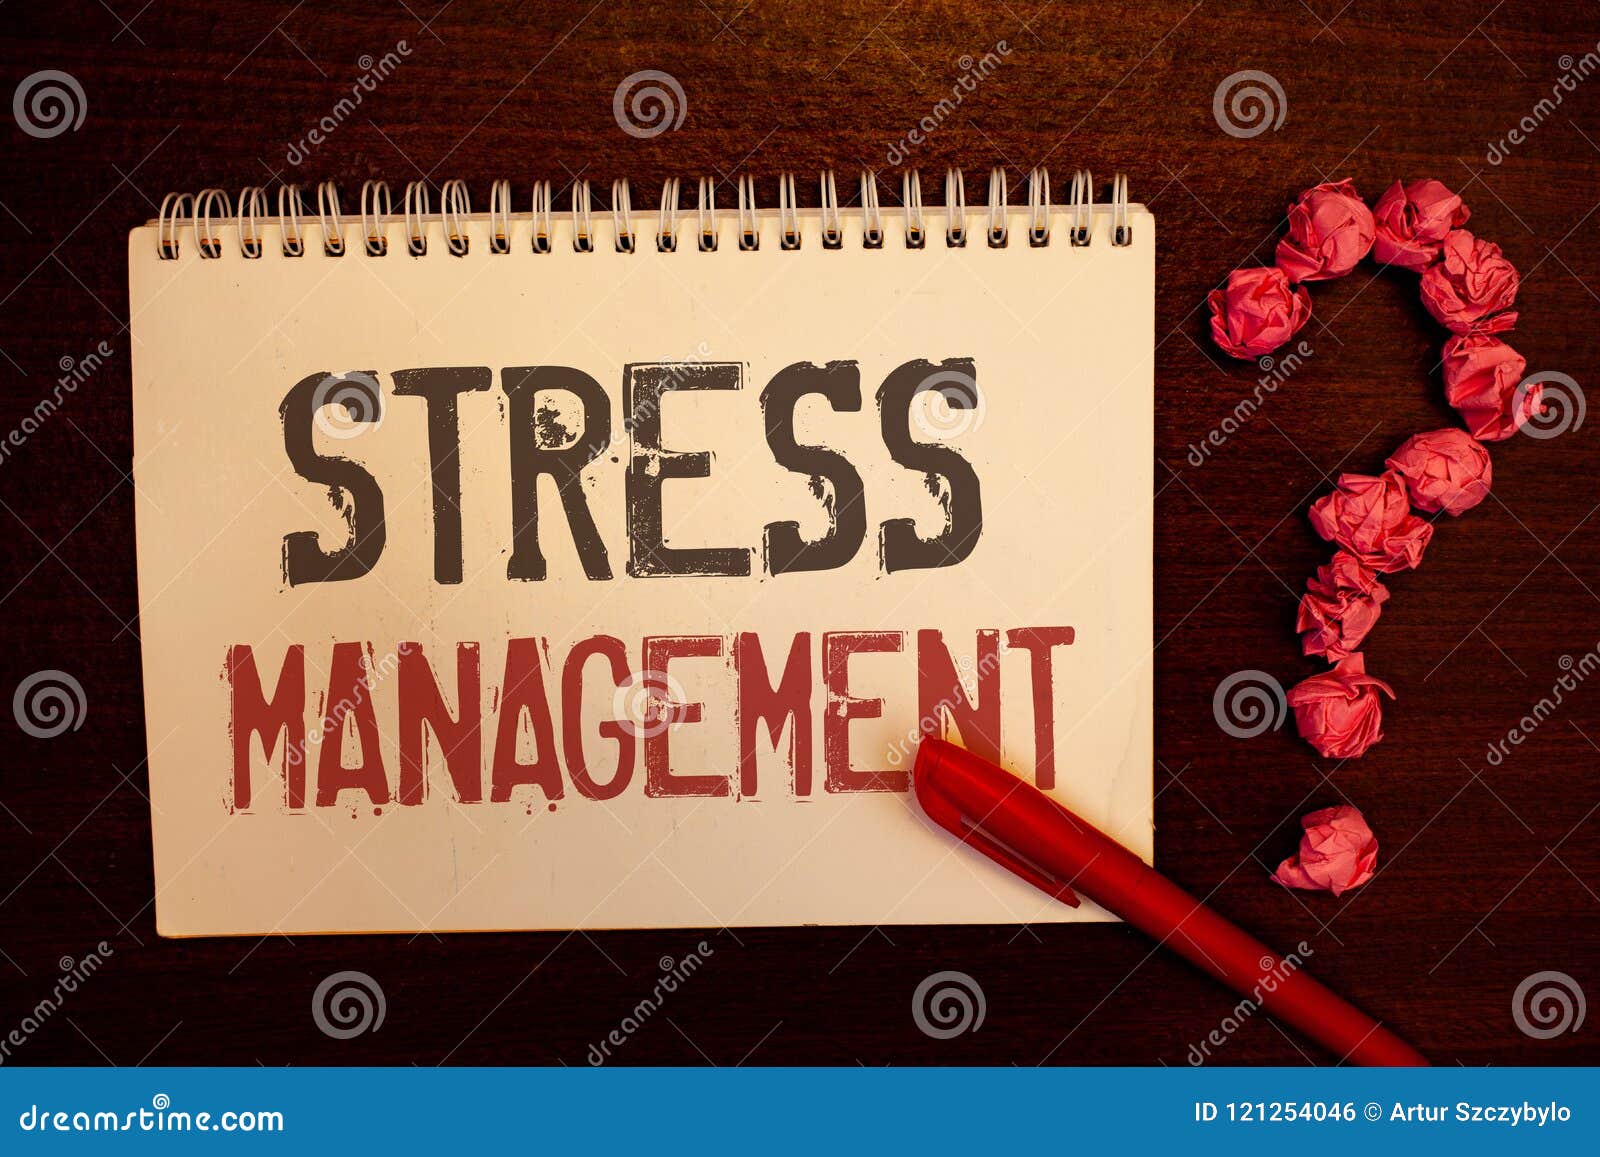 Handwriting Text Stress Management Concept Meaning Meditation Therapy